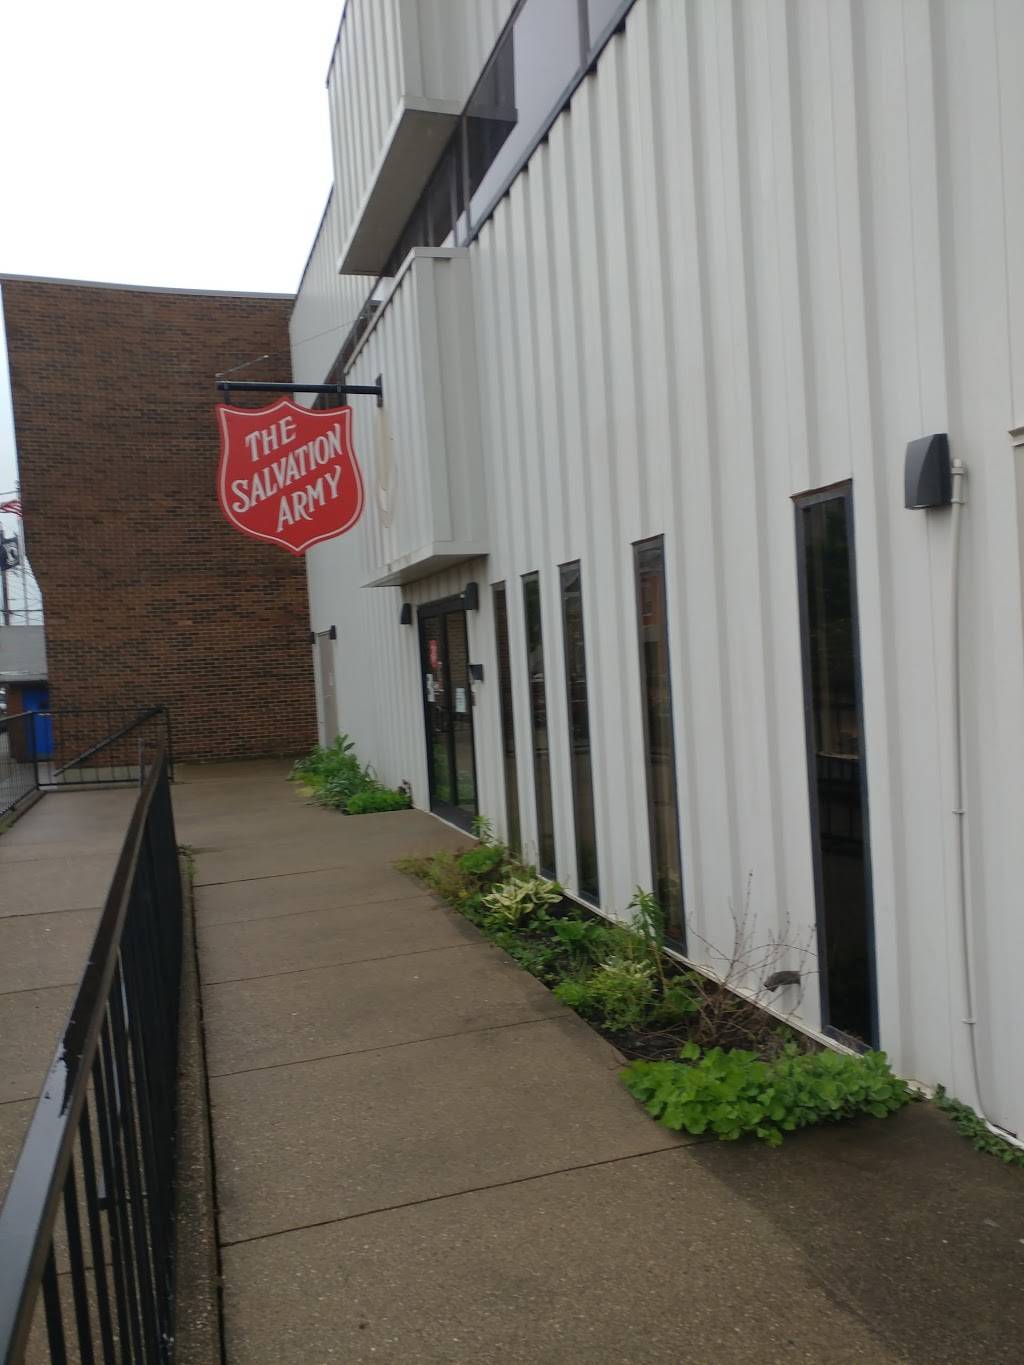 Newport Salvation Army | 340 W 10th St, Newport, KY 41071, USA | Phone: (859) 431-1063